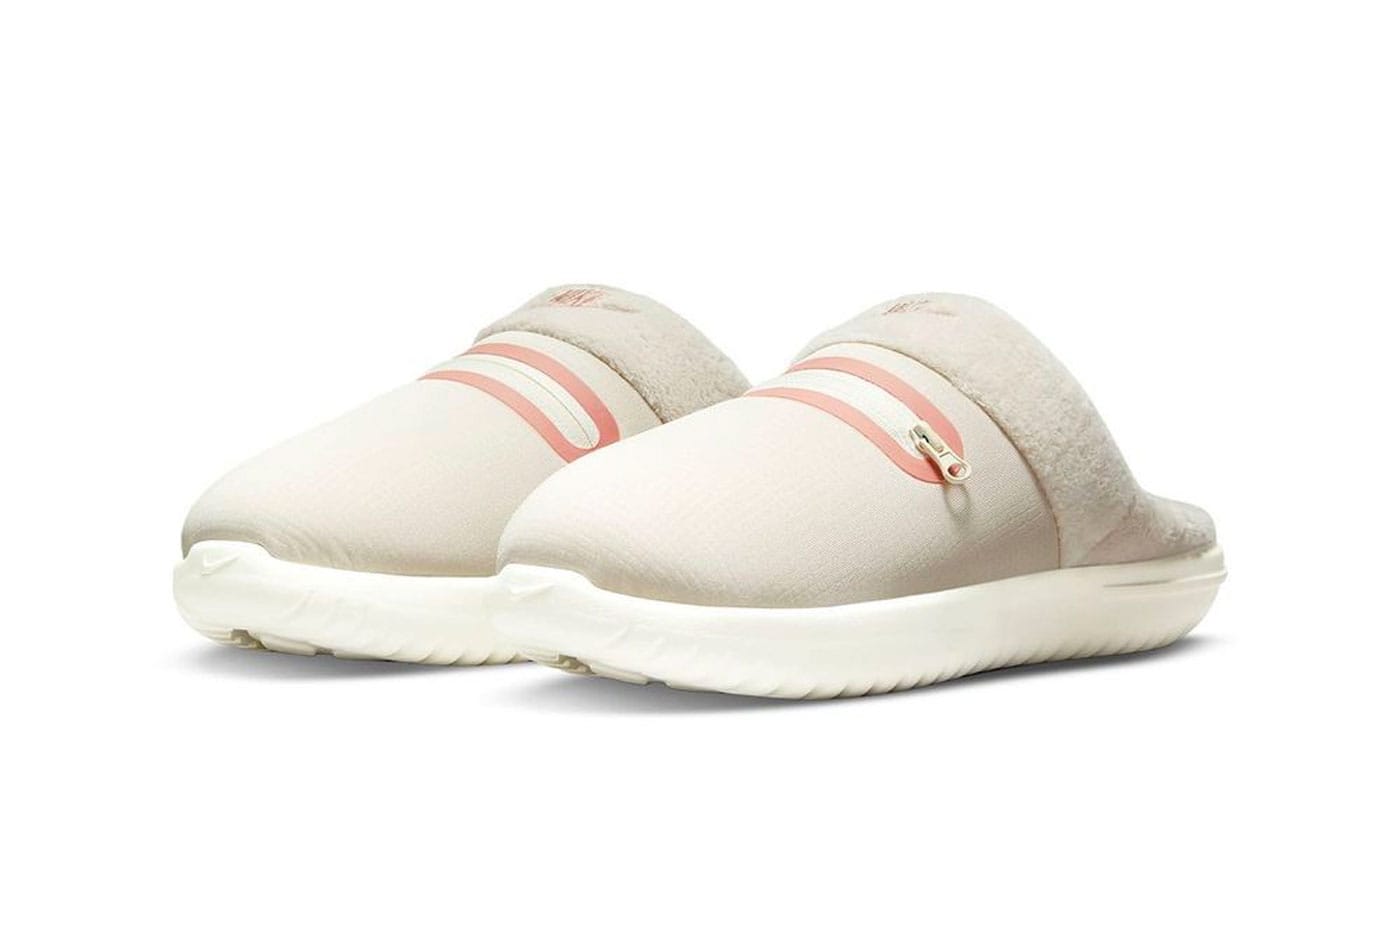 Adidas and Nike slippers instock !! New... - The Hanger store | Facebook